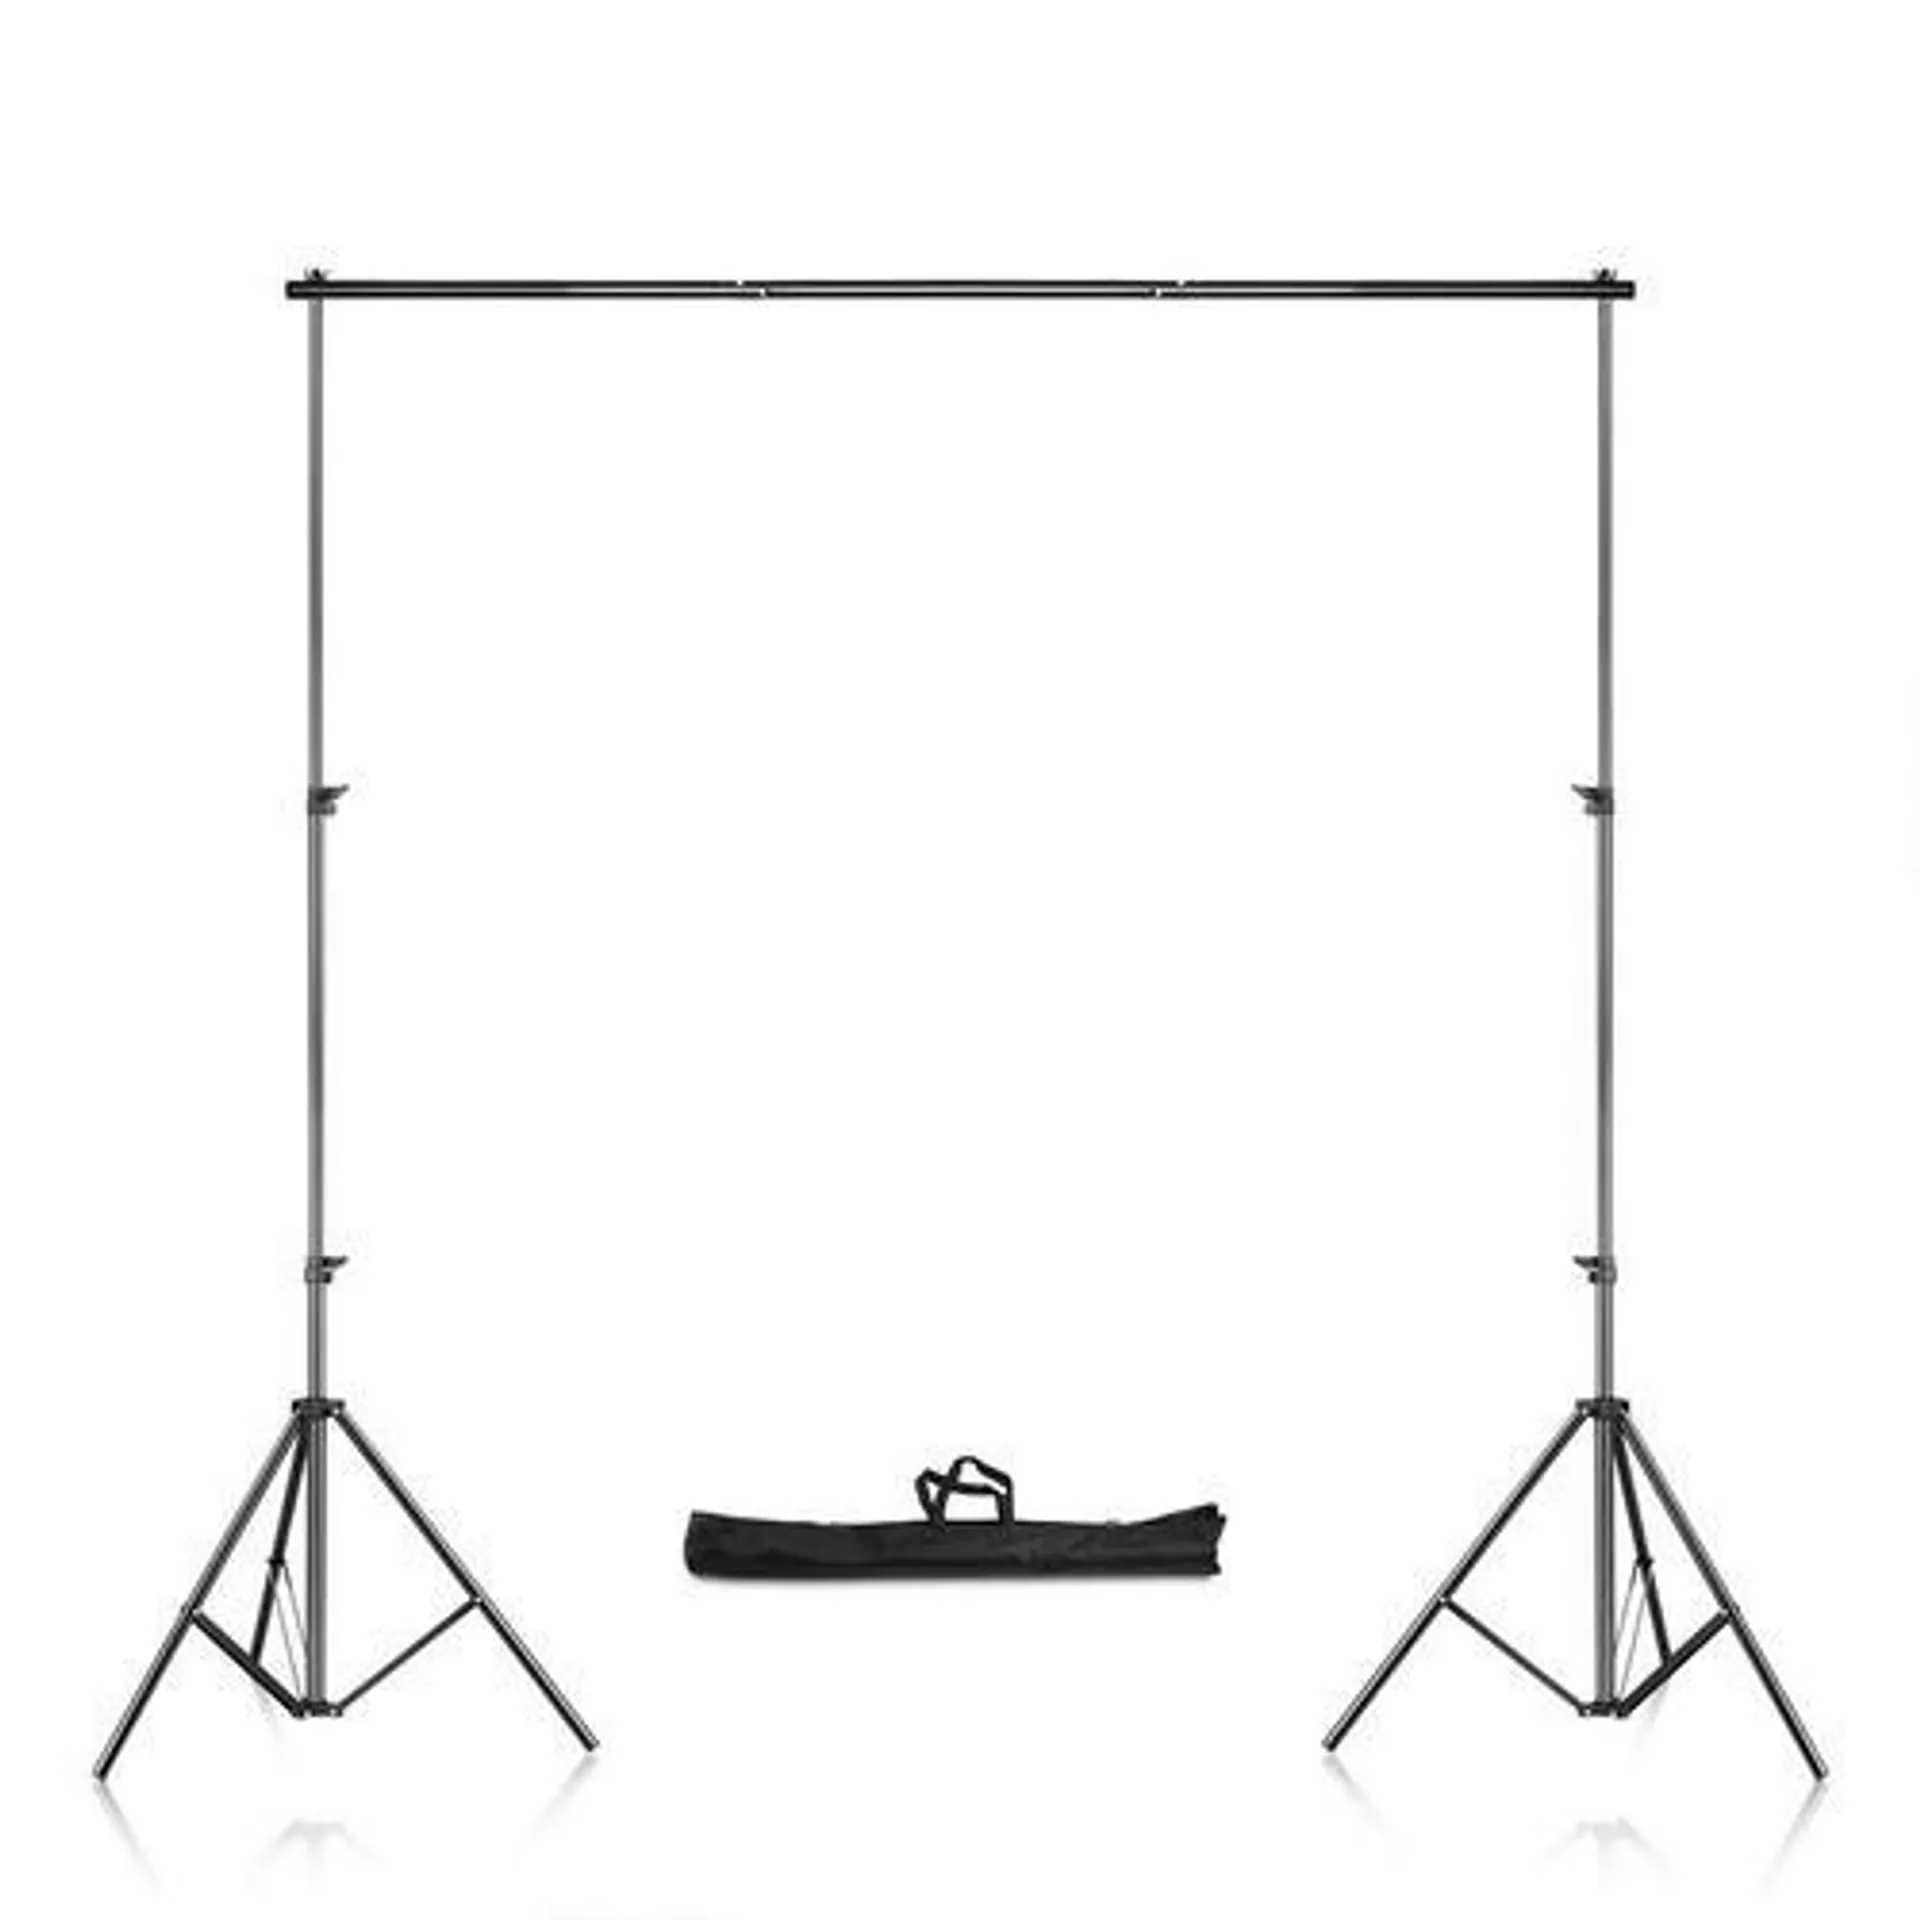 Adjustable Background Support Stand Photo Backdrop Crossbar Kit, 6.56x6.56ft/2x2m - PrimeCables®